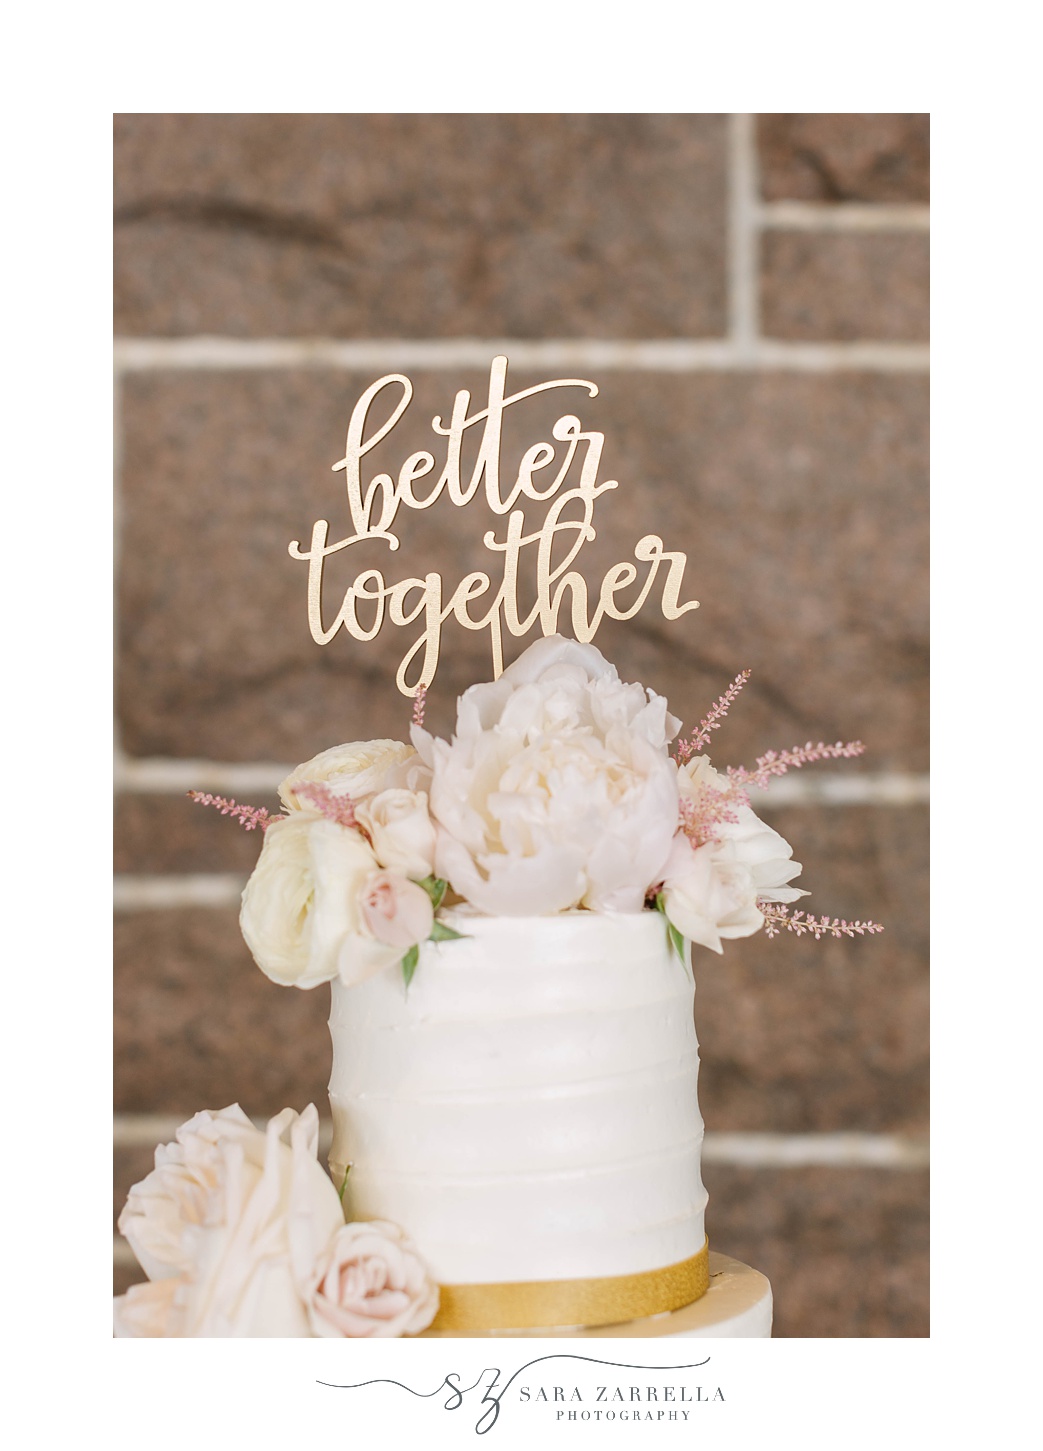 "better together" cake topper for tiered wedding cake with floral accents